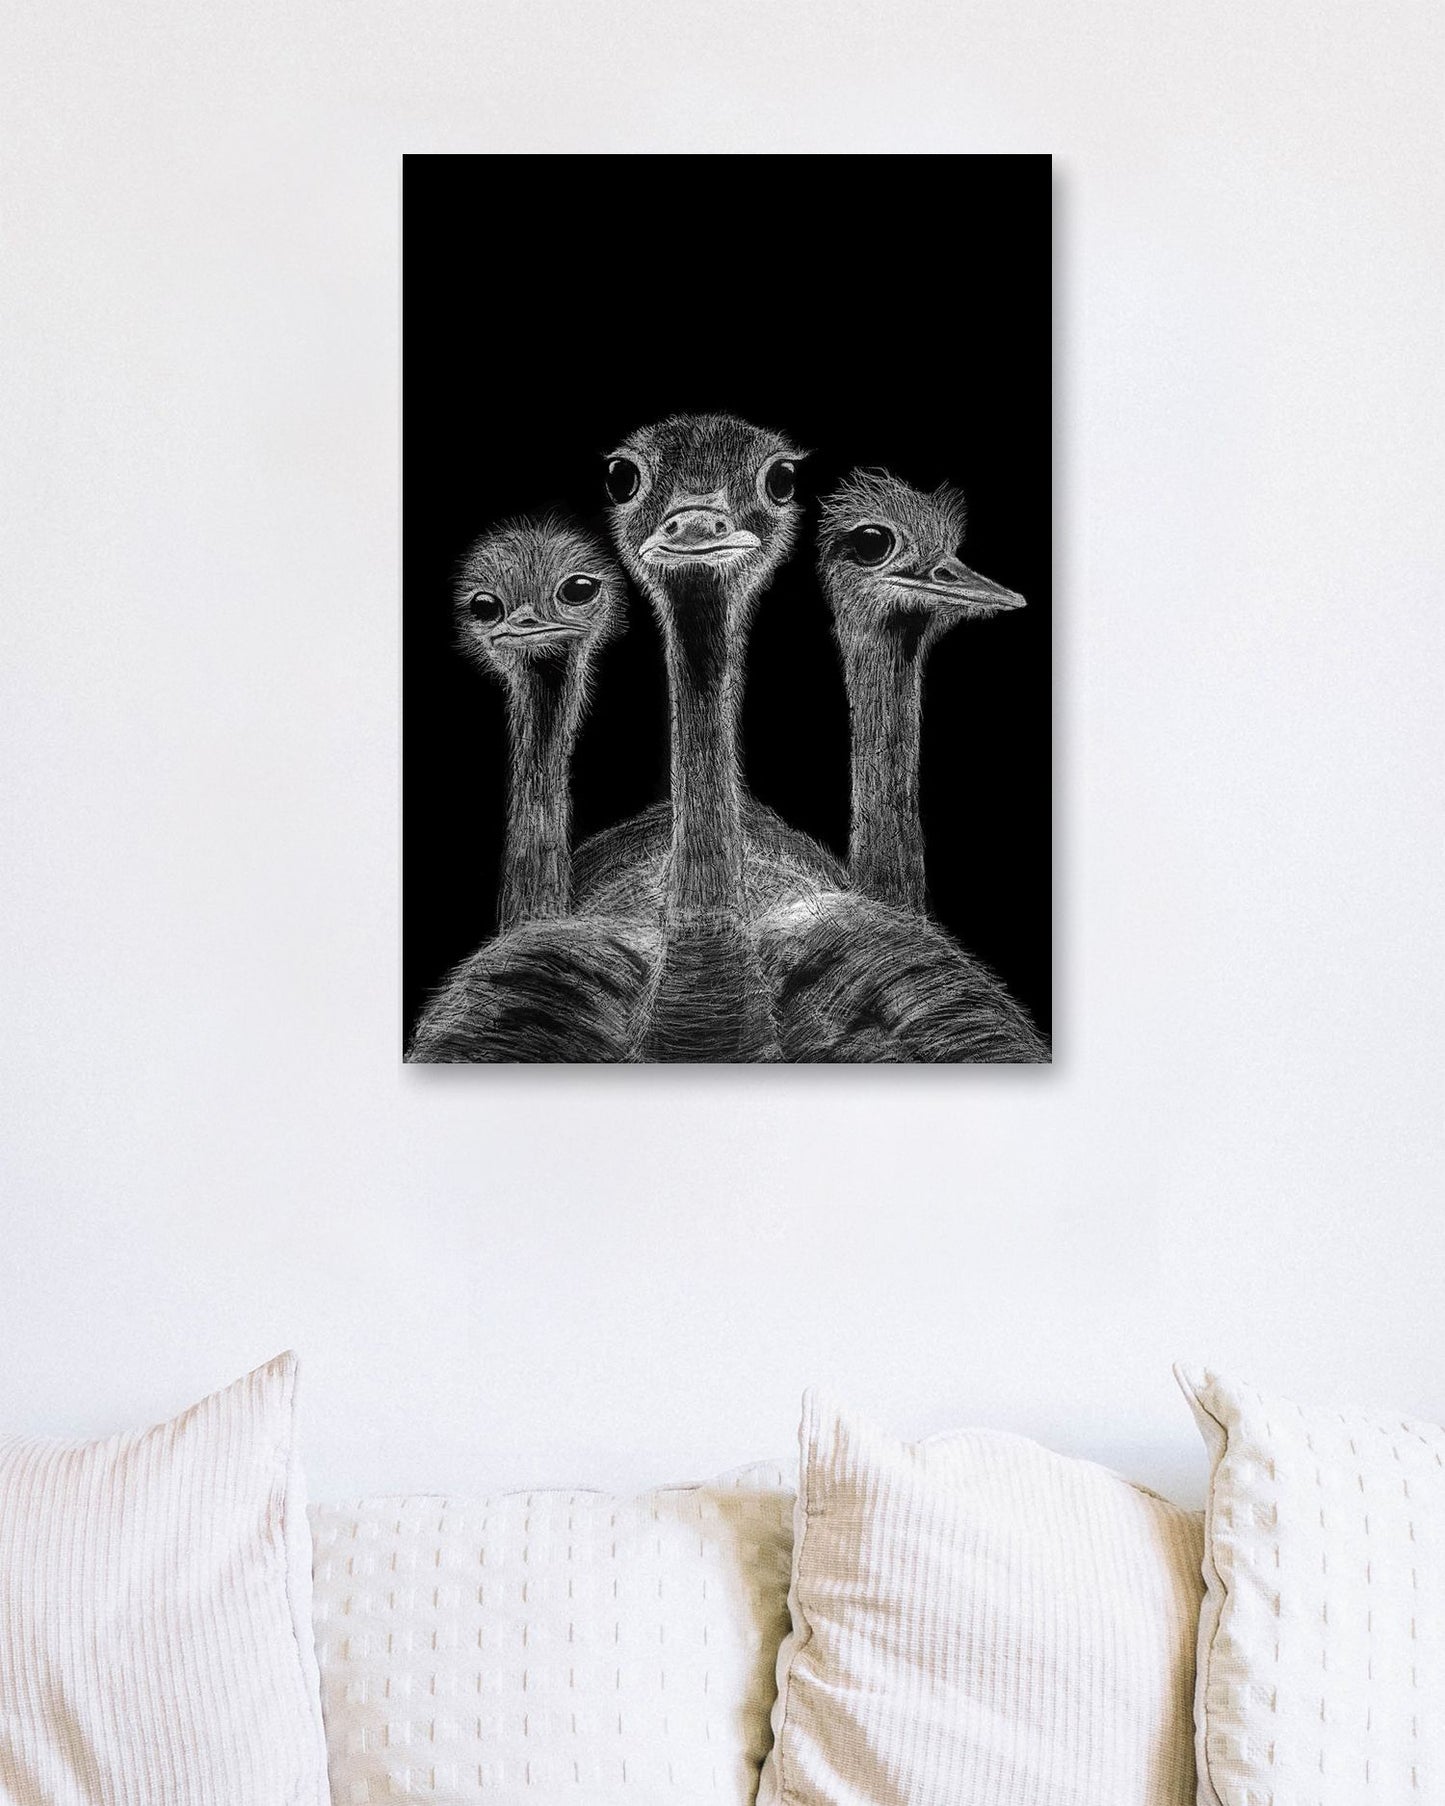 The Ostriches - @Windriani